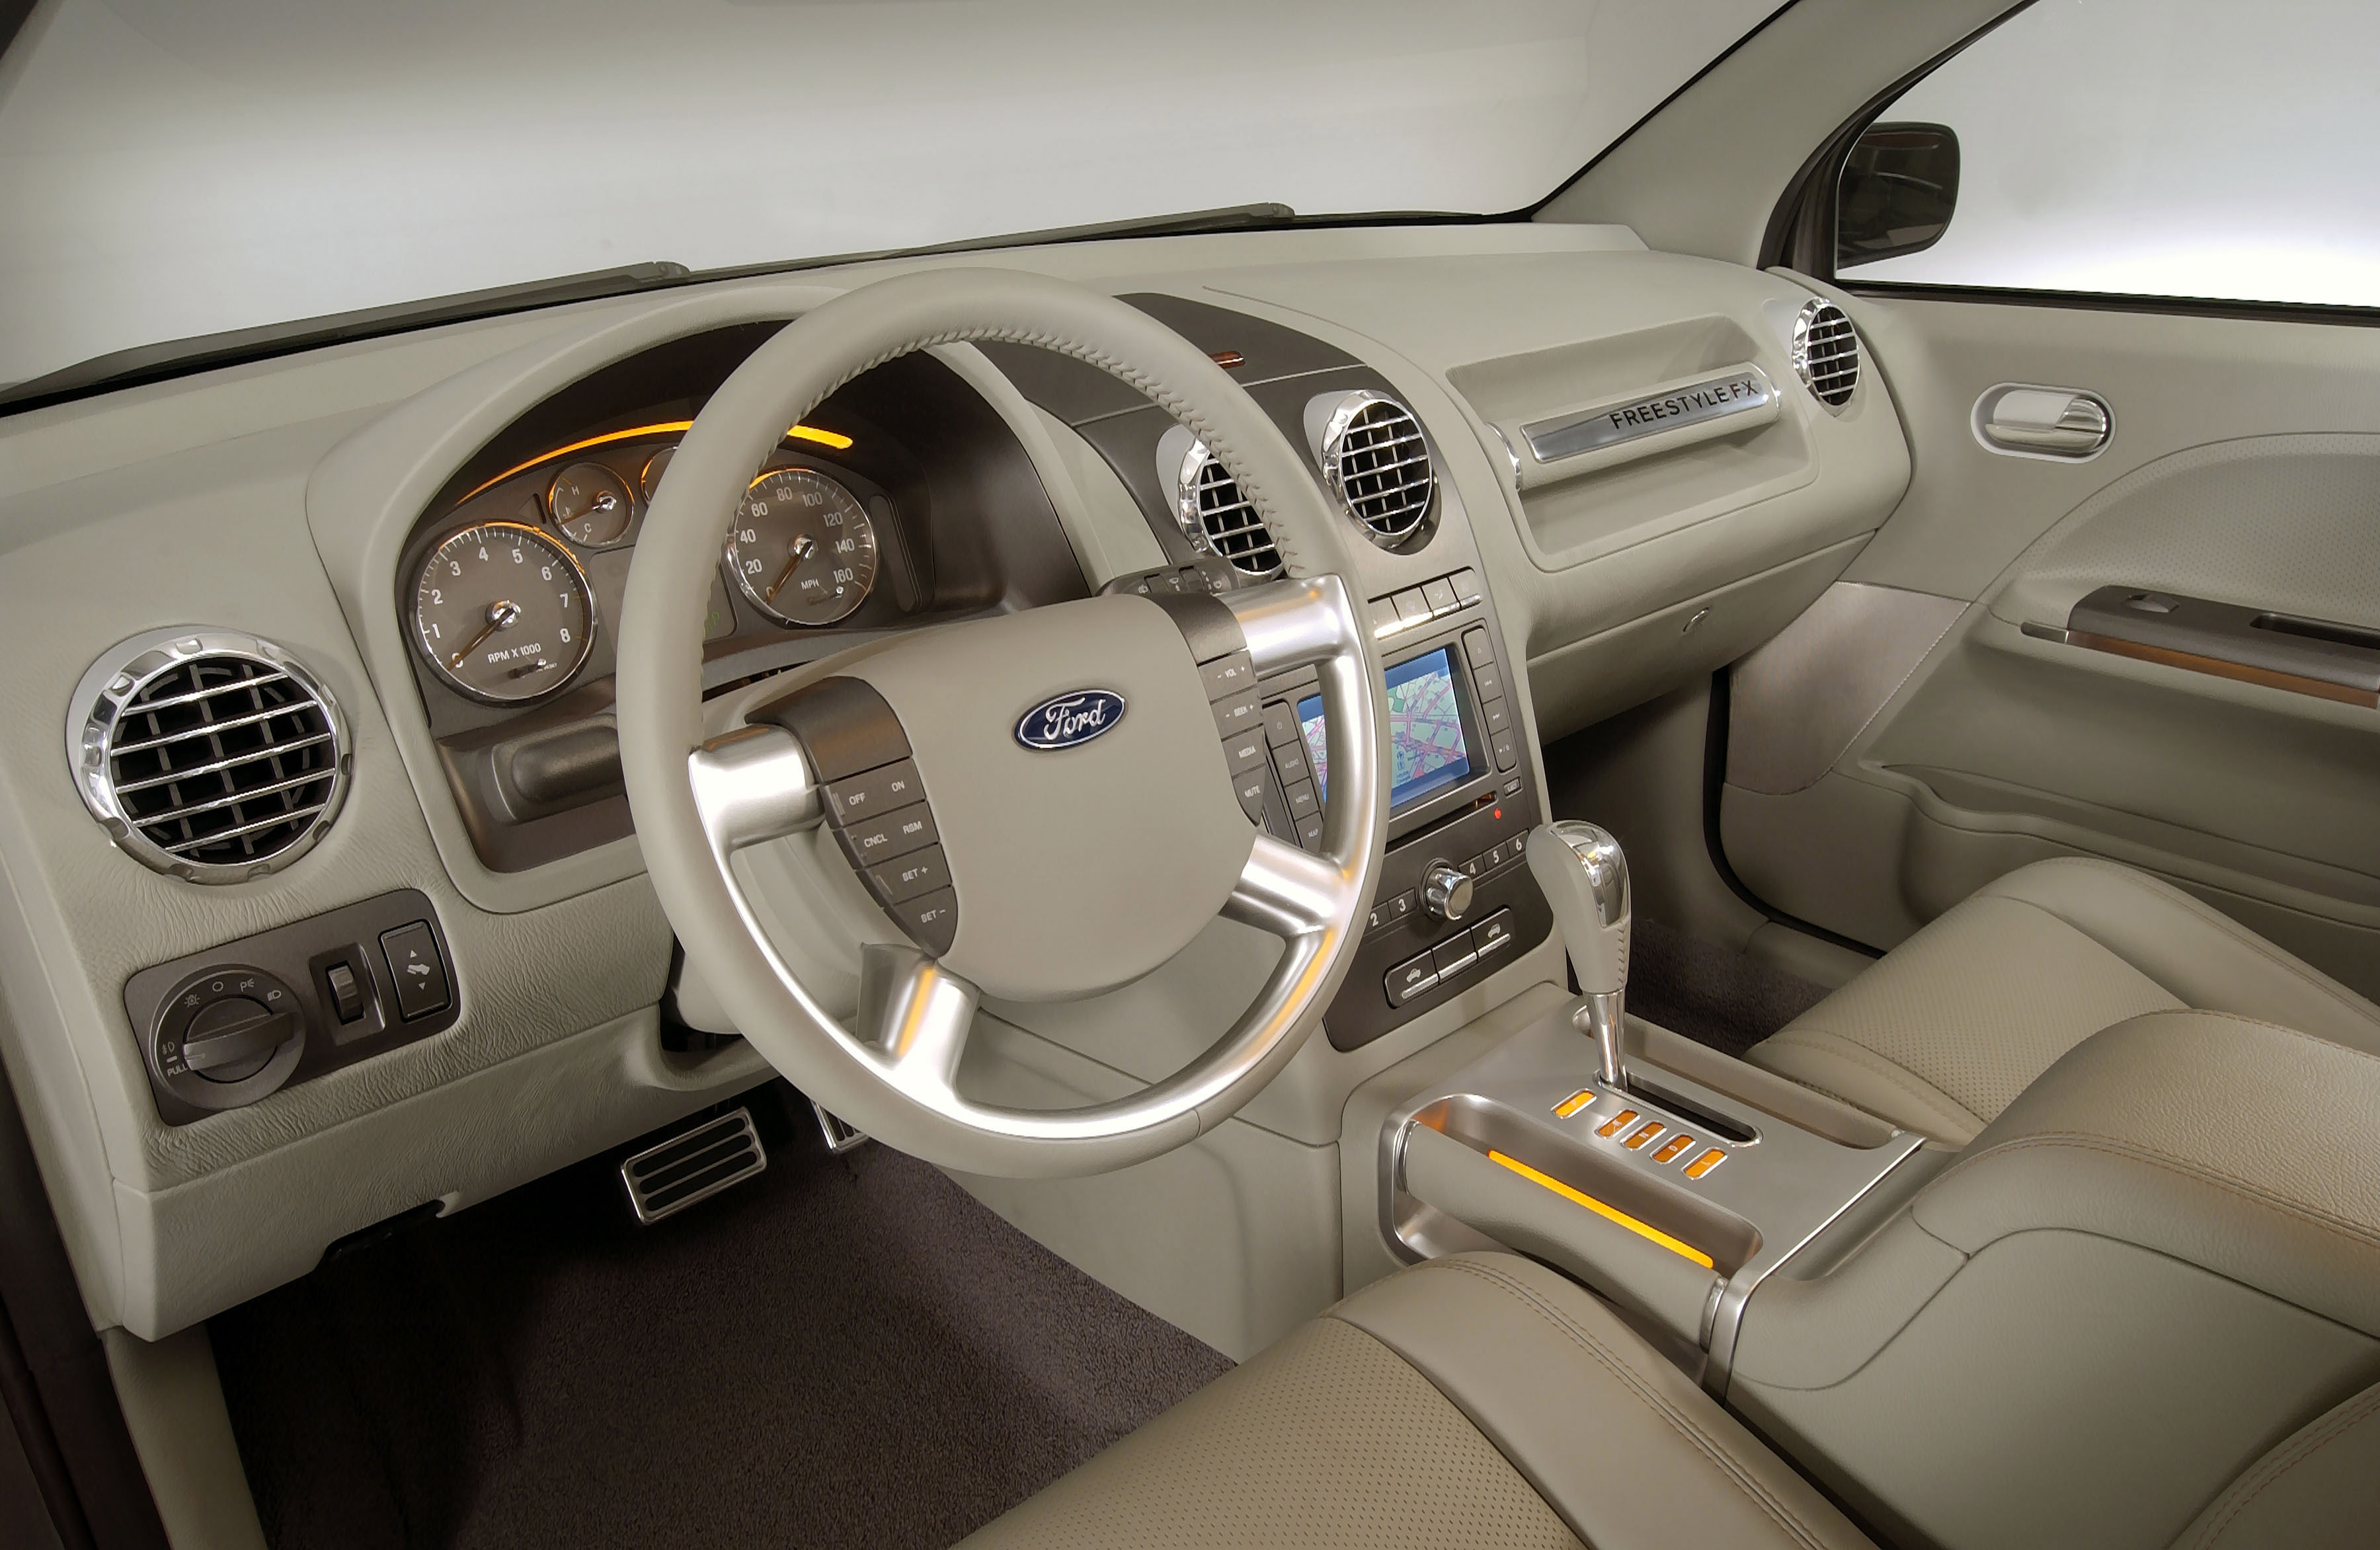 Ford Freestyle FX Concept